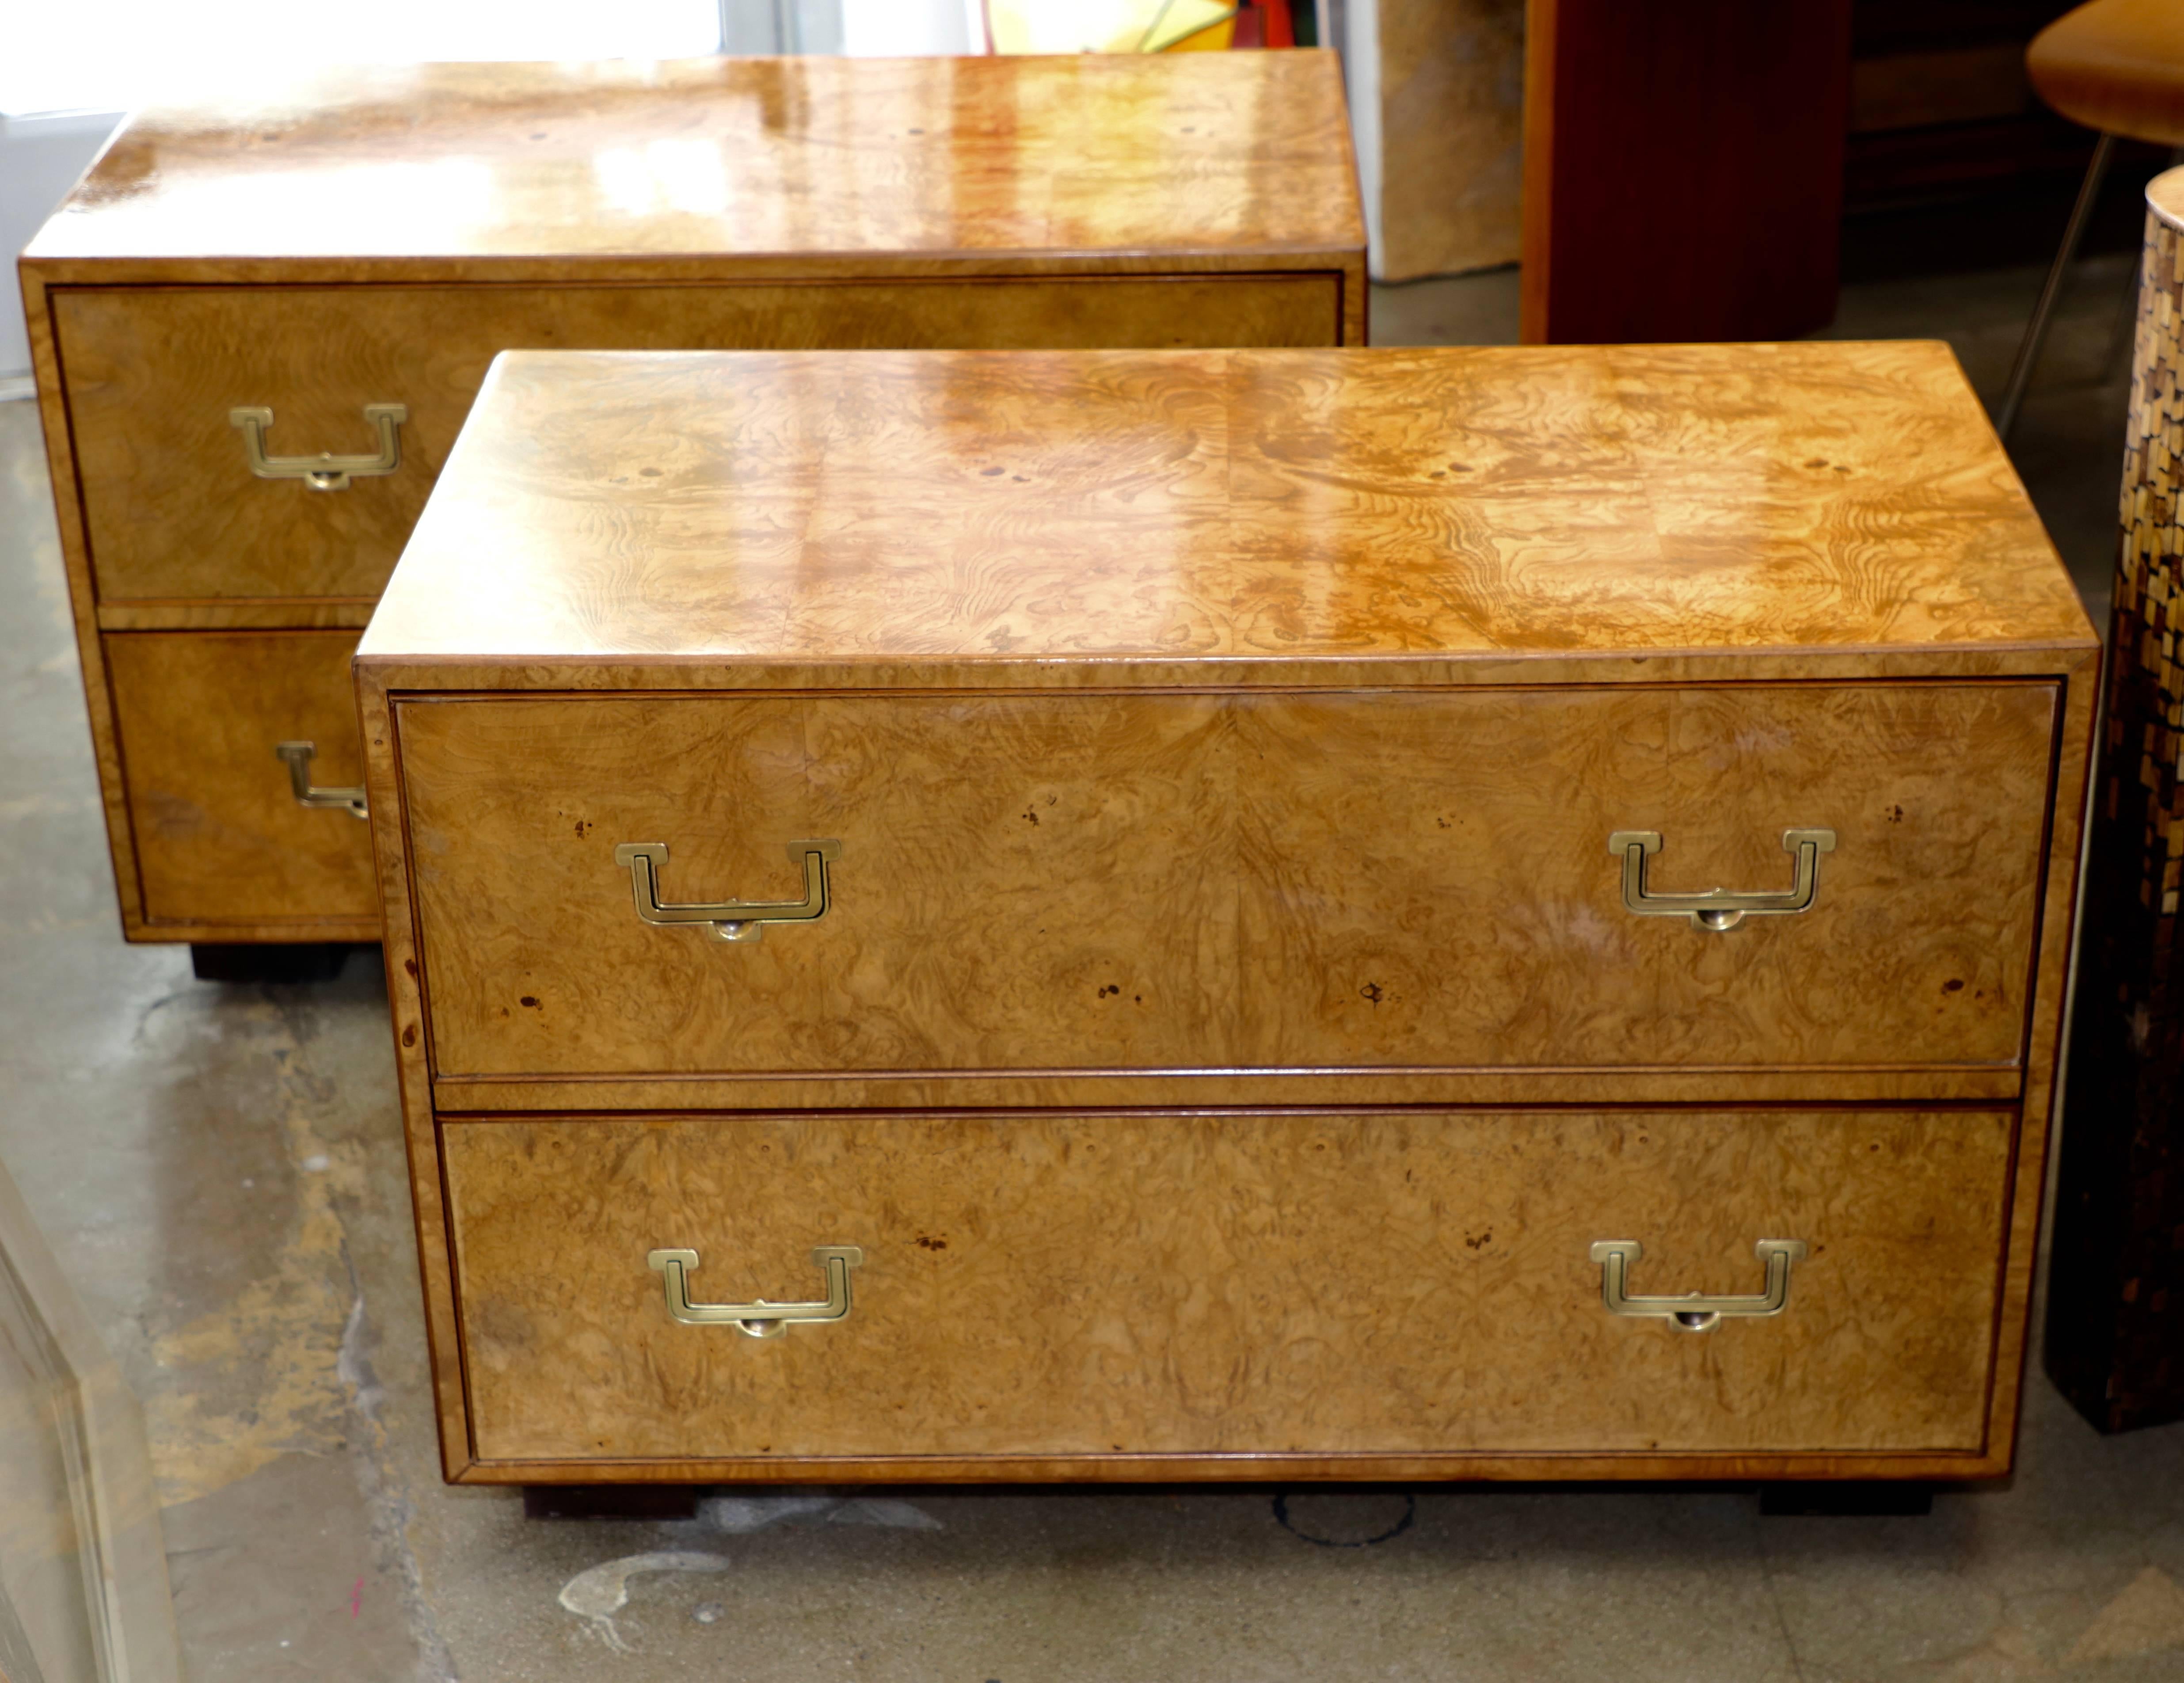 20th Century Pair of Widdicomb Campaign Styles Nightstand or End Tables in Burlwood